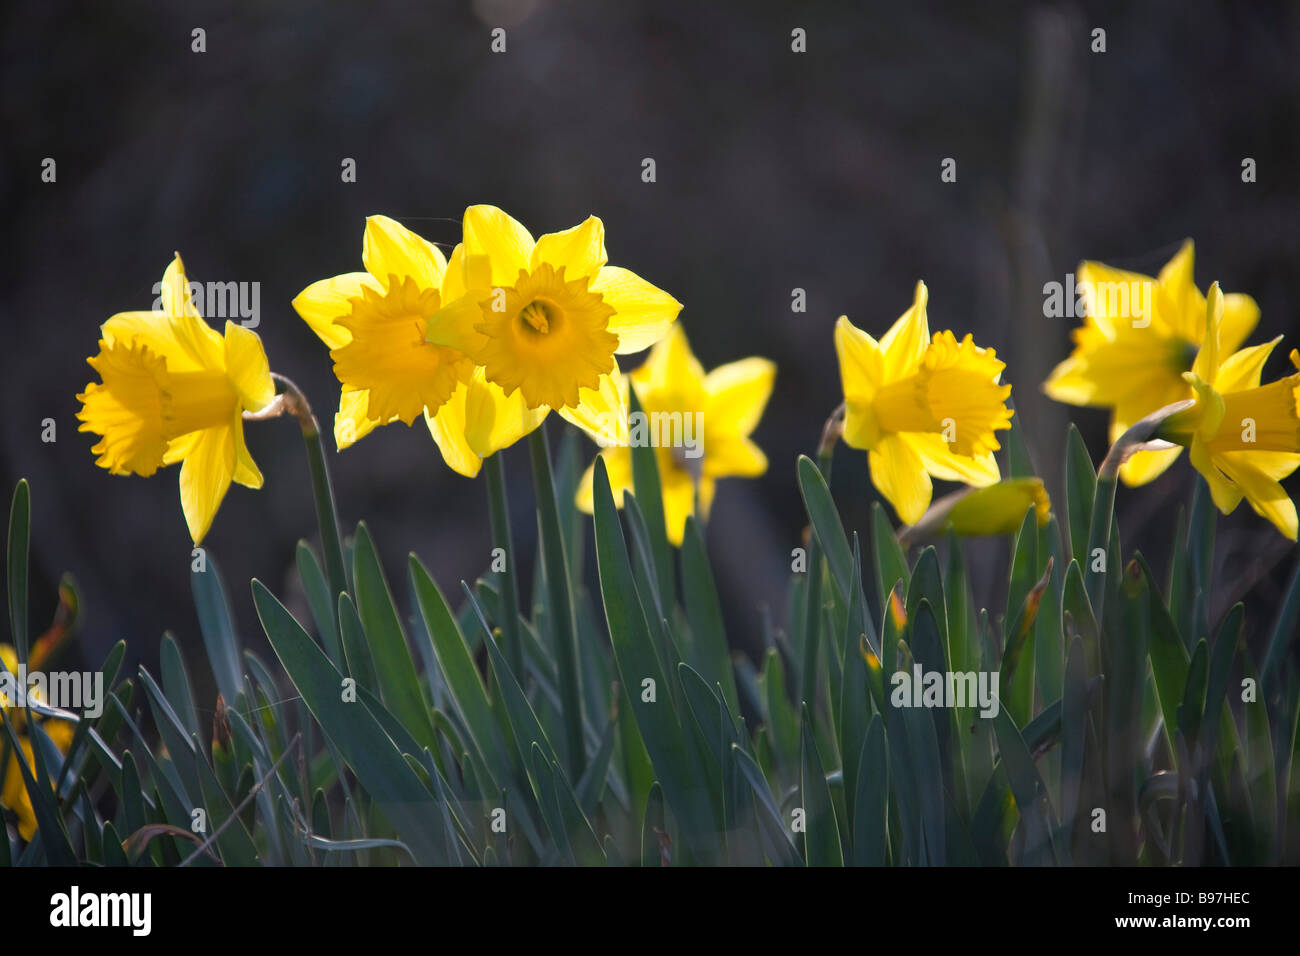 row of Daffodil flowers  daffodils Head on yellow petals St david's day Wales  Jonquille narcisse welsh 90349 Daffodil Horizonta Stock Photo